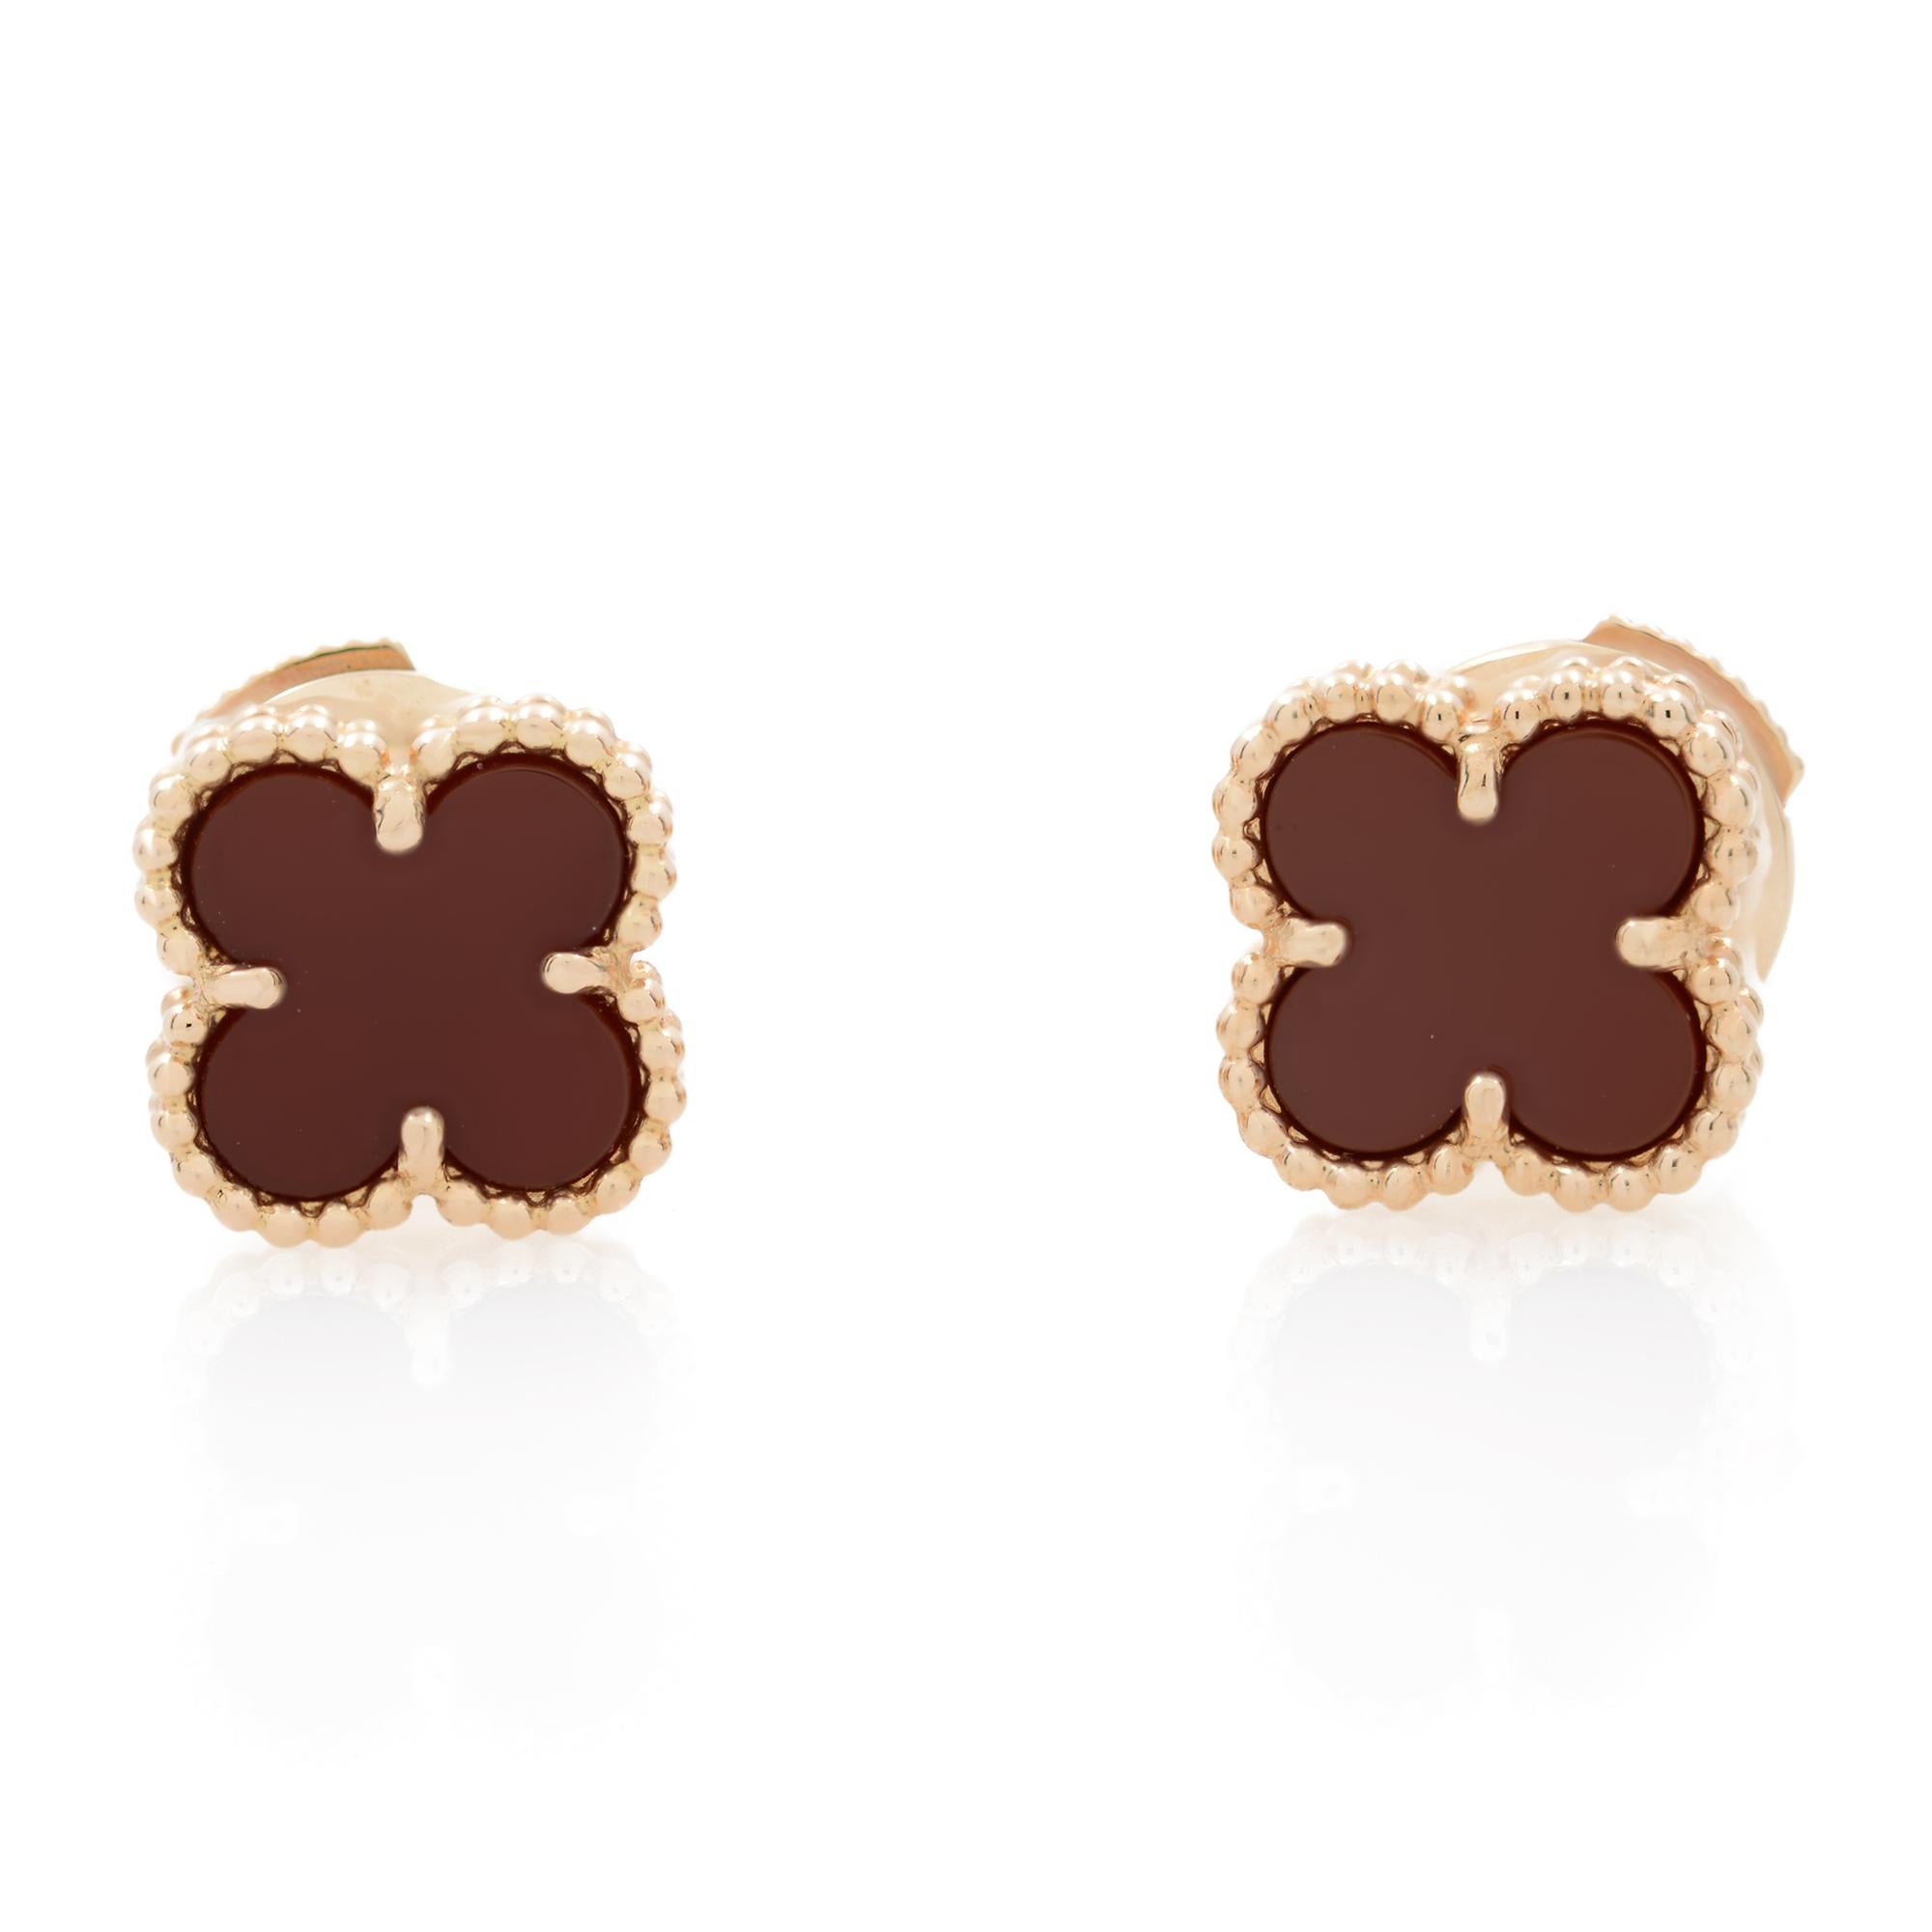 Van Cleef & Arpels gold carnelian sweet Alhambra stud earrings. These elegant earrings are finely crafted in 18k rose gold featuring a clover motif encasing with carnelian. These are beautiful earrings with the one of a kind style of Van Cleef &